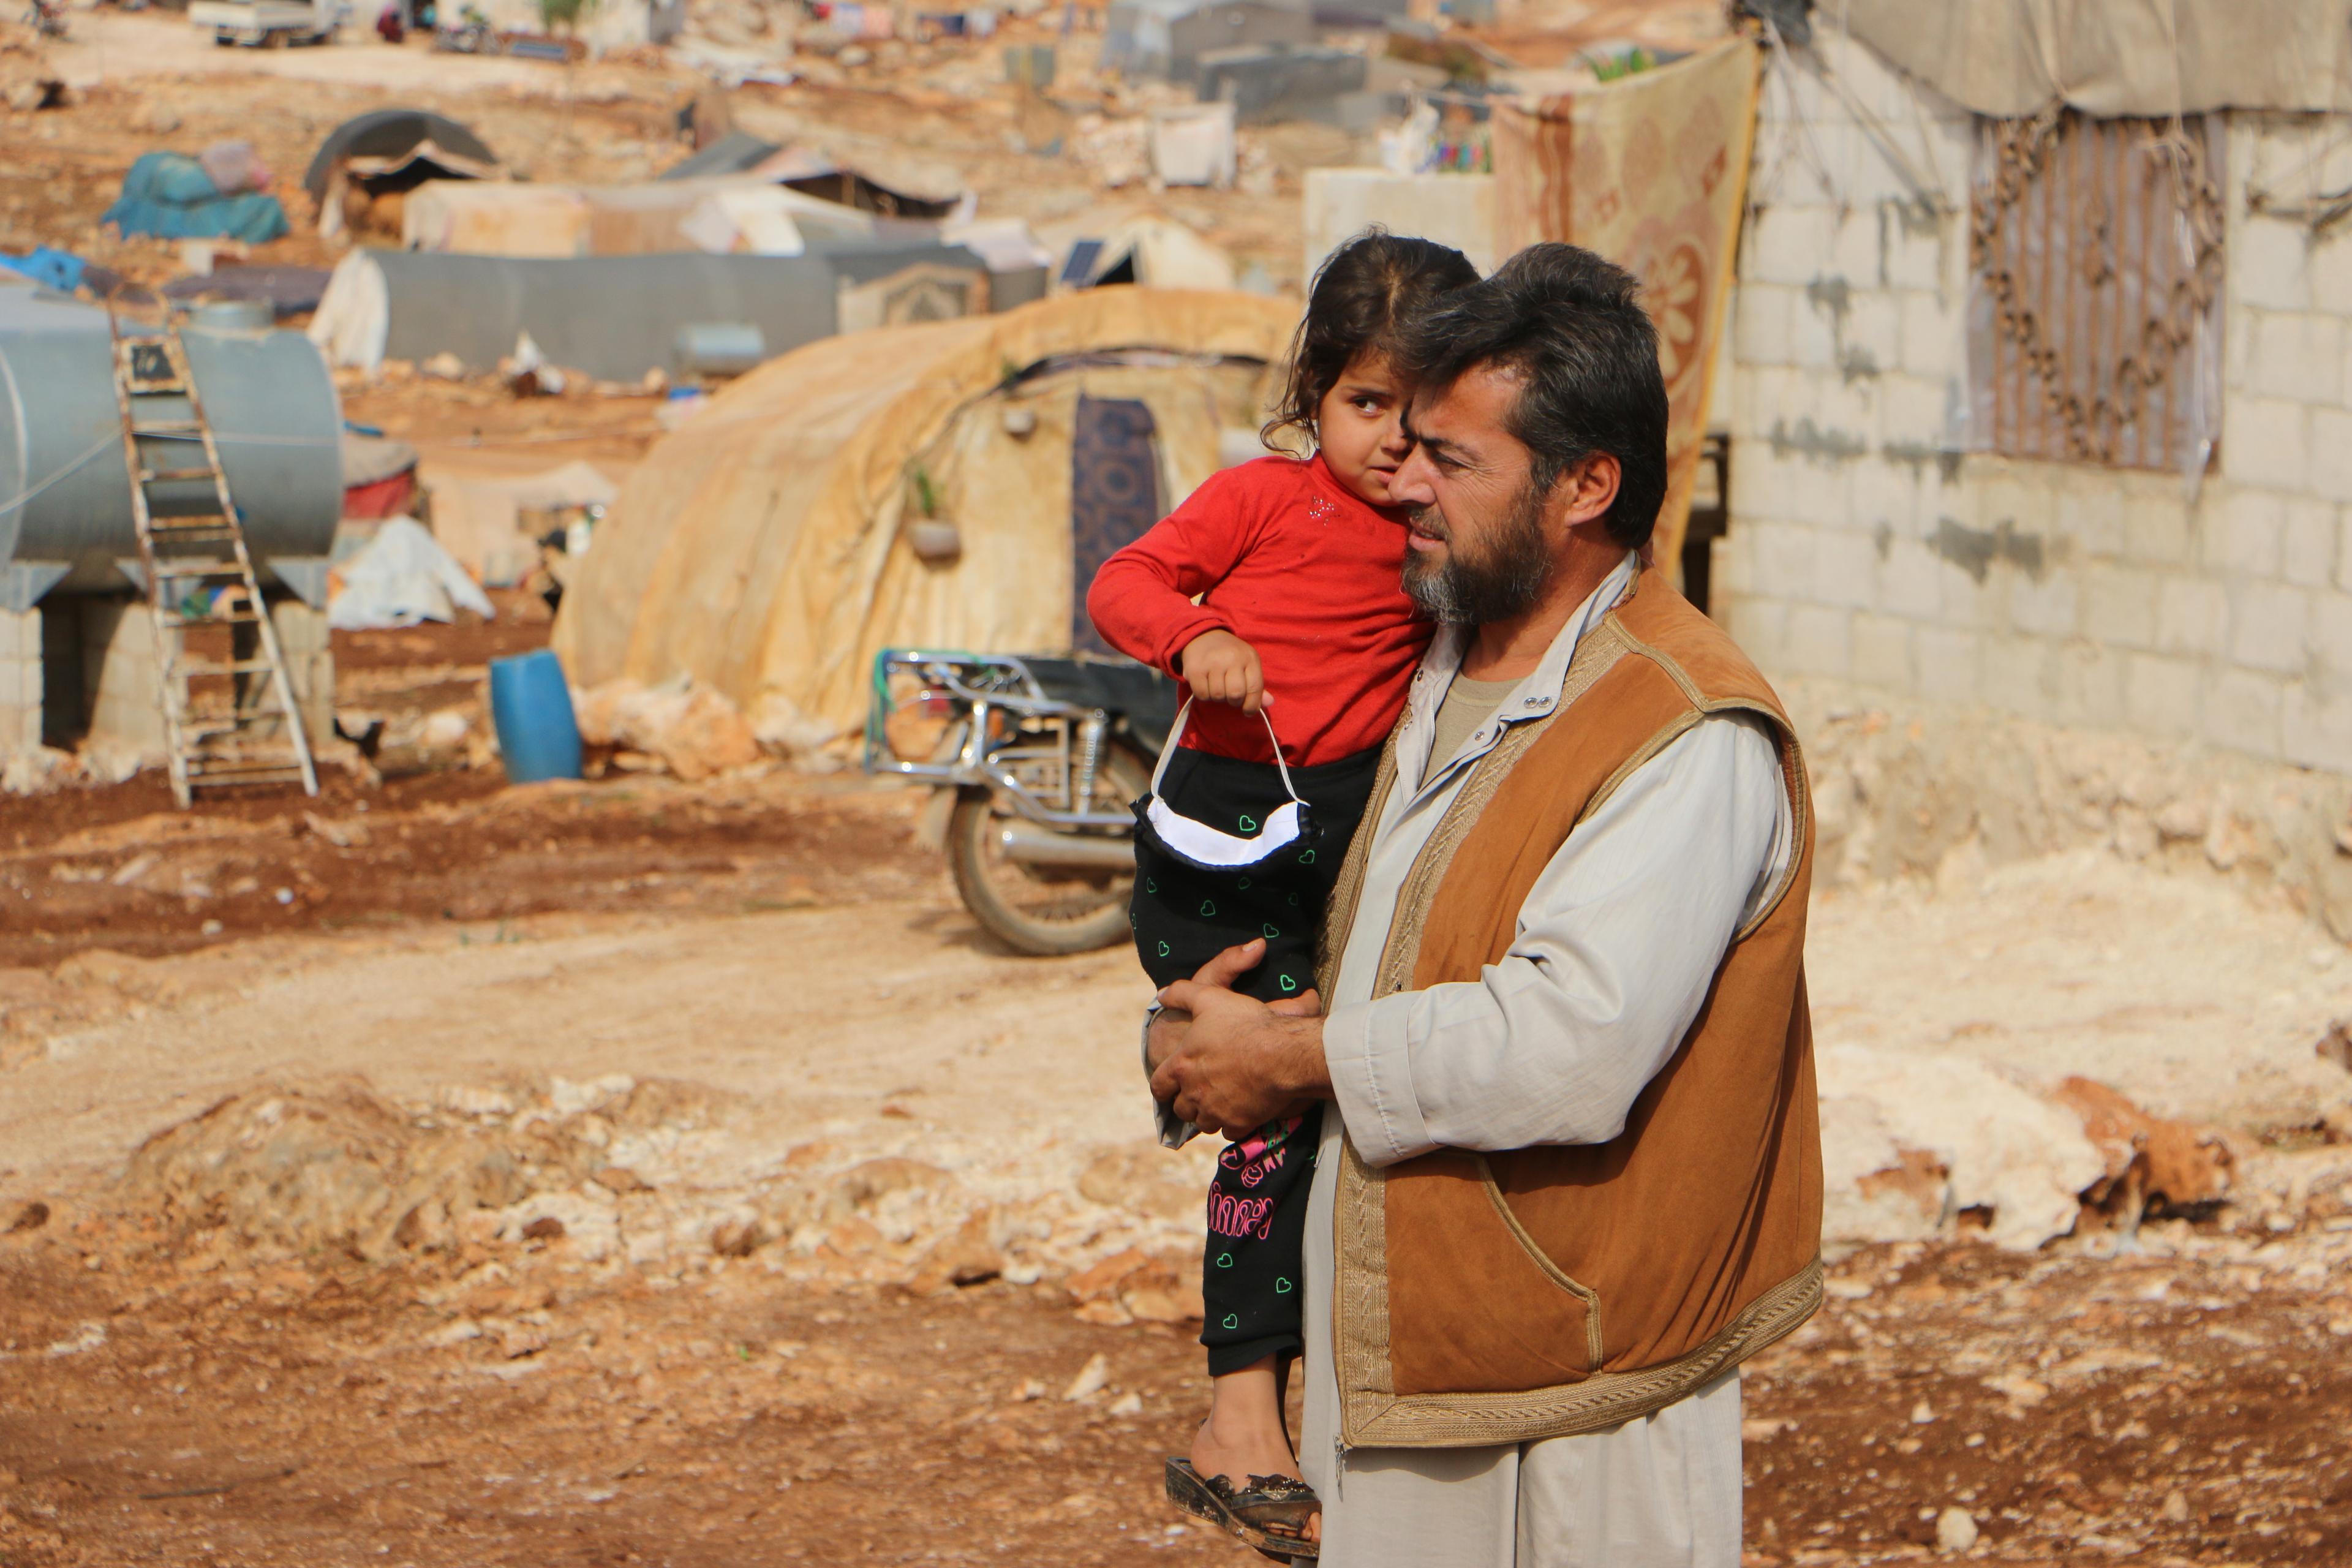 Chahine fled his hometown in 2016 due to heavy shelling. Since then, he has lived in various camps in the region, before settling in Fan Al-Shemali two years ago. “The situation in general is bad, and it is only getting worse.”  - November 2020 